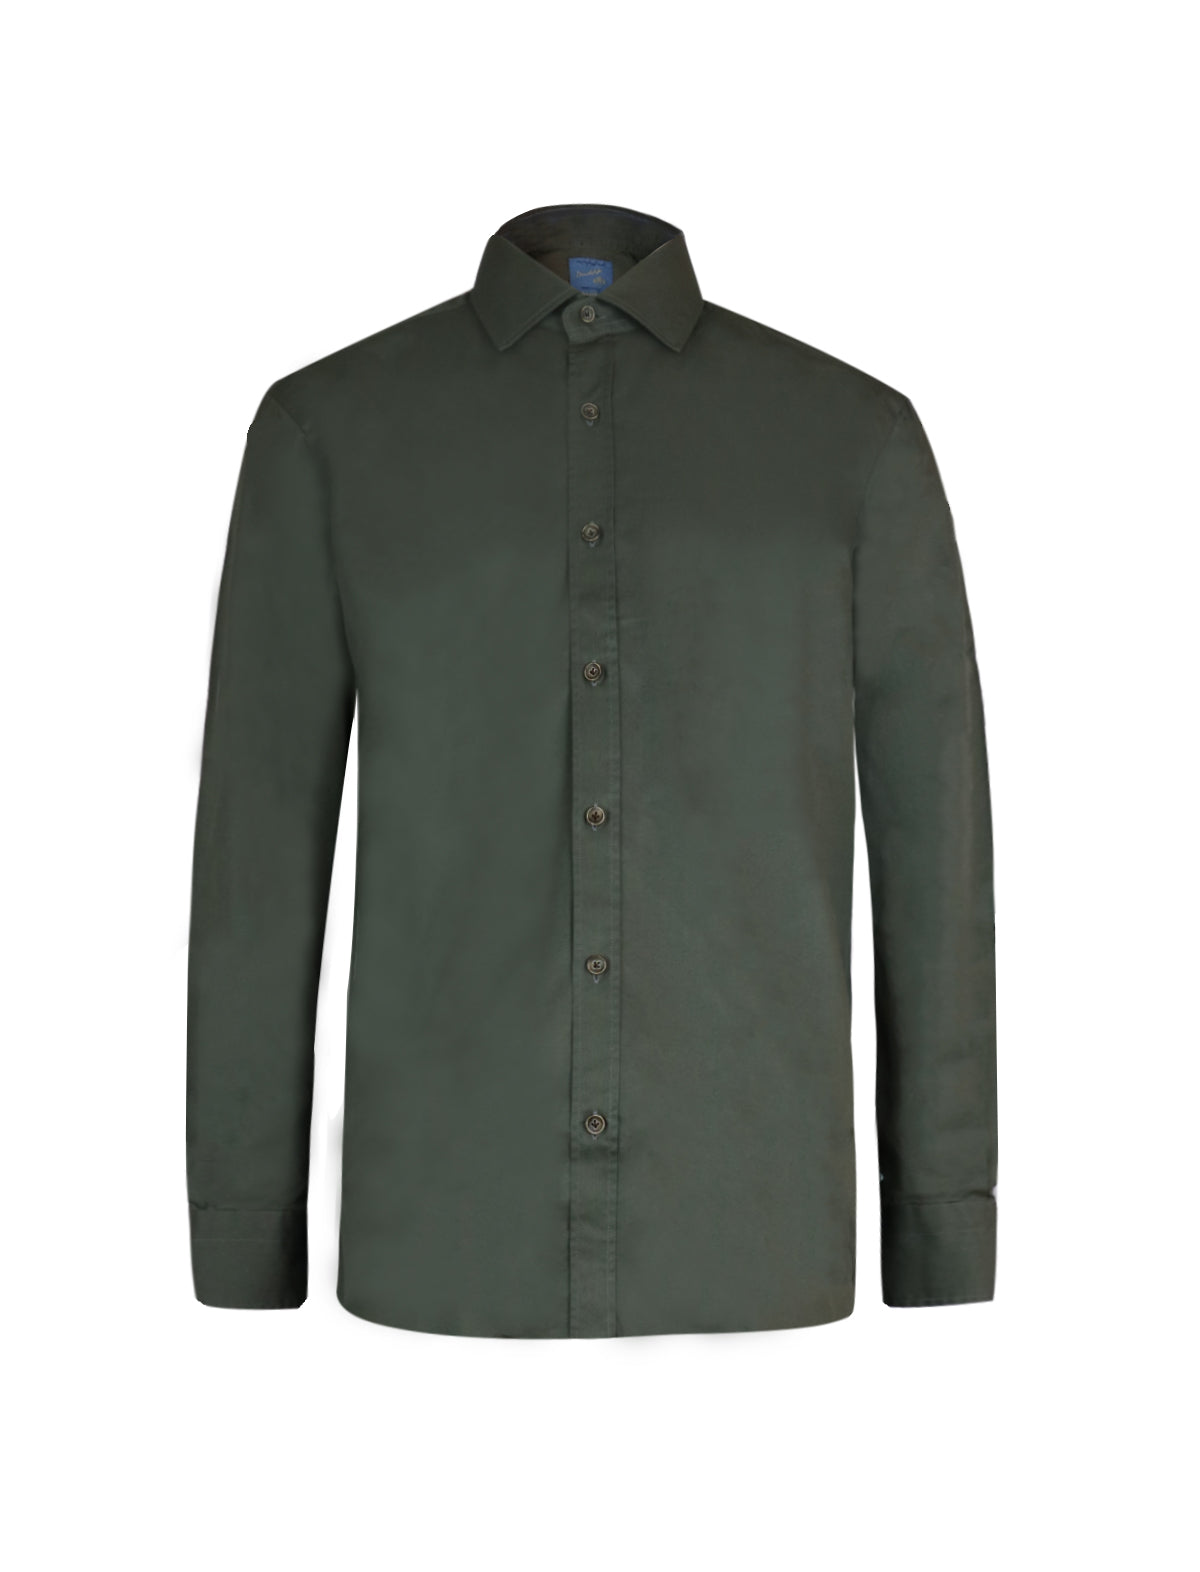 Barba Napoli Tailored Cotton Shirt in Army Green